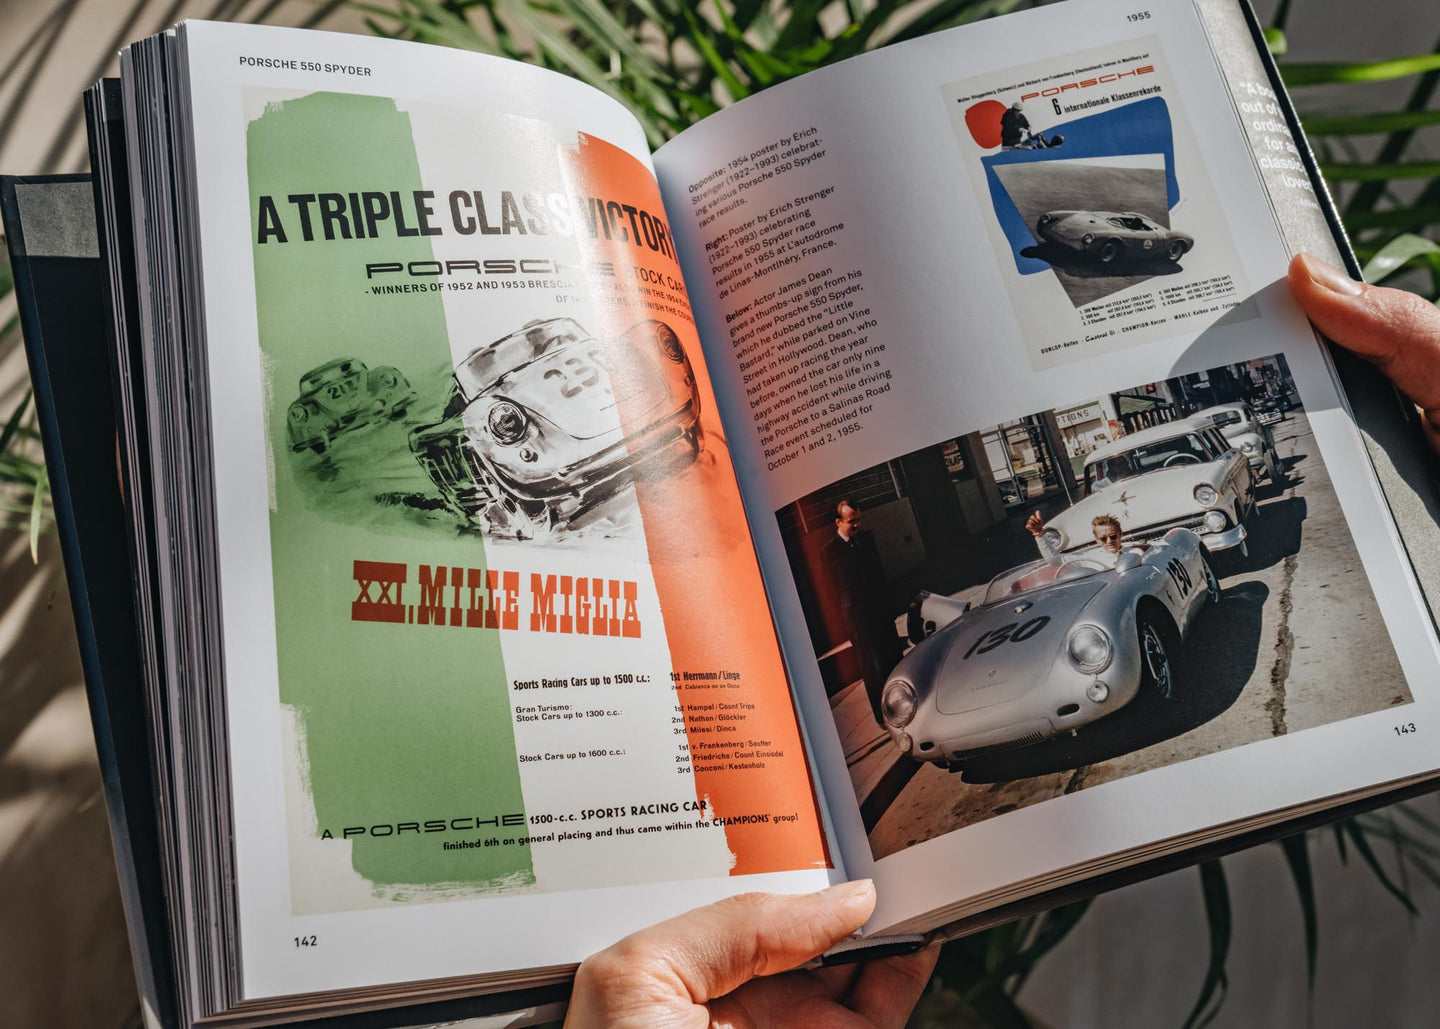 50 Ultimate Sports Cars by Charlotte & Peter Fiell